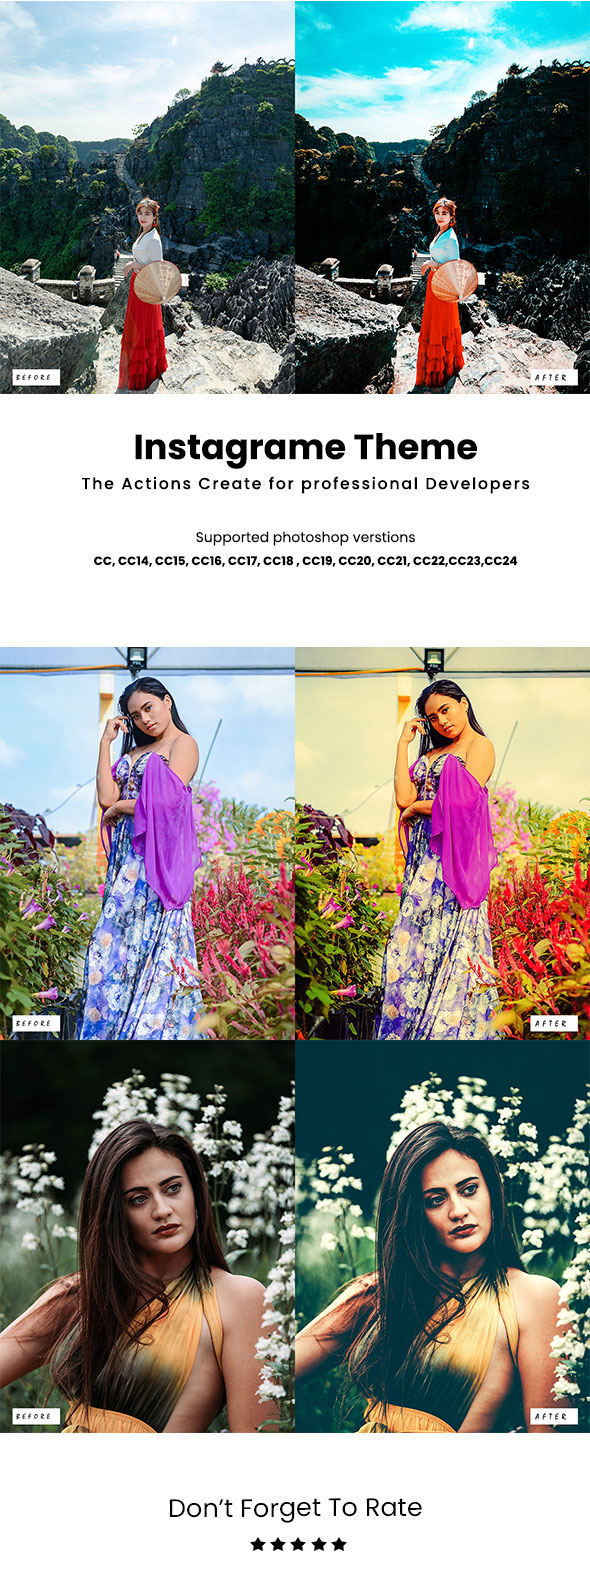 Instagrame Theme Photoshop Actions